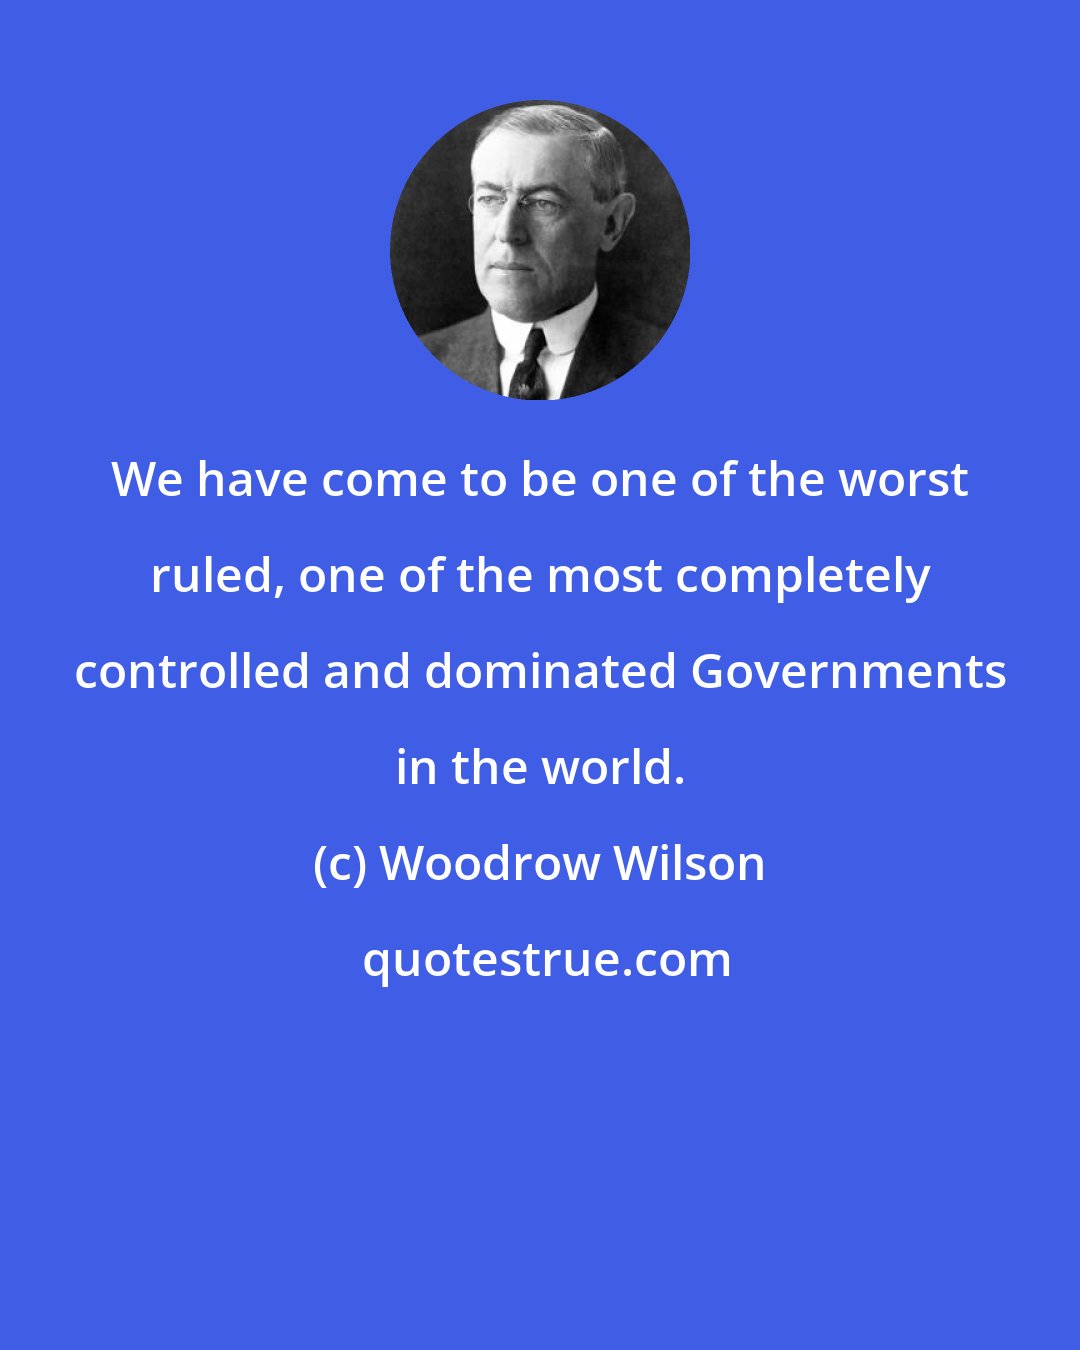 Woodrow Wilson: We have come to be one of the worst ruled, one of the most completely controlled and dominated Governments in the world.